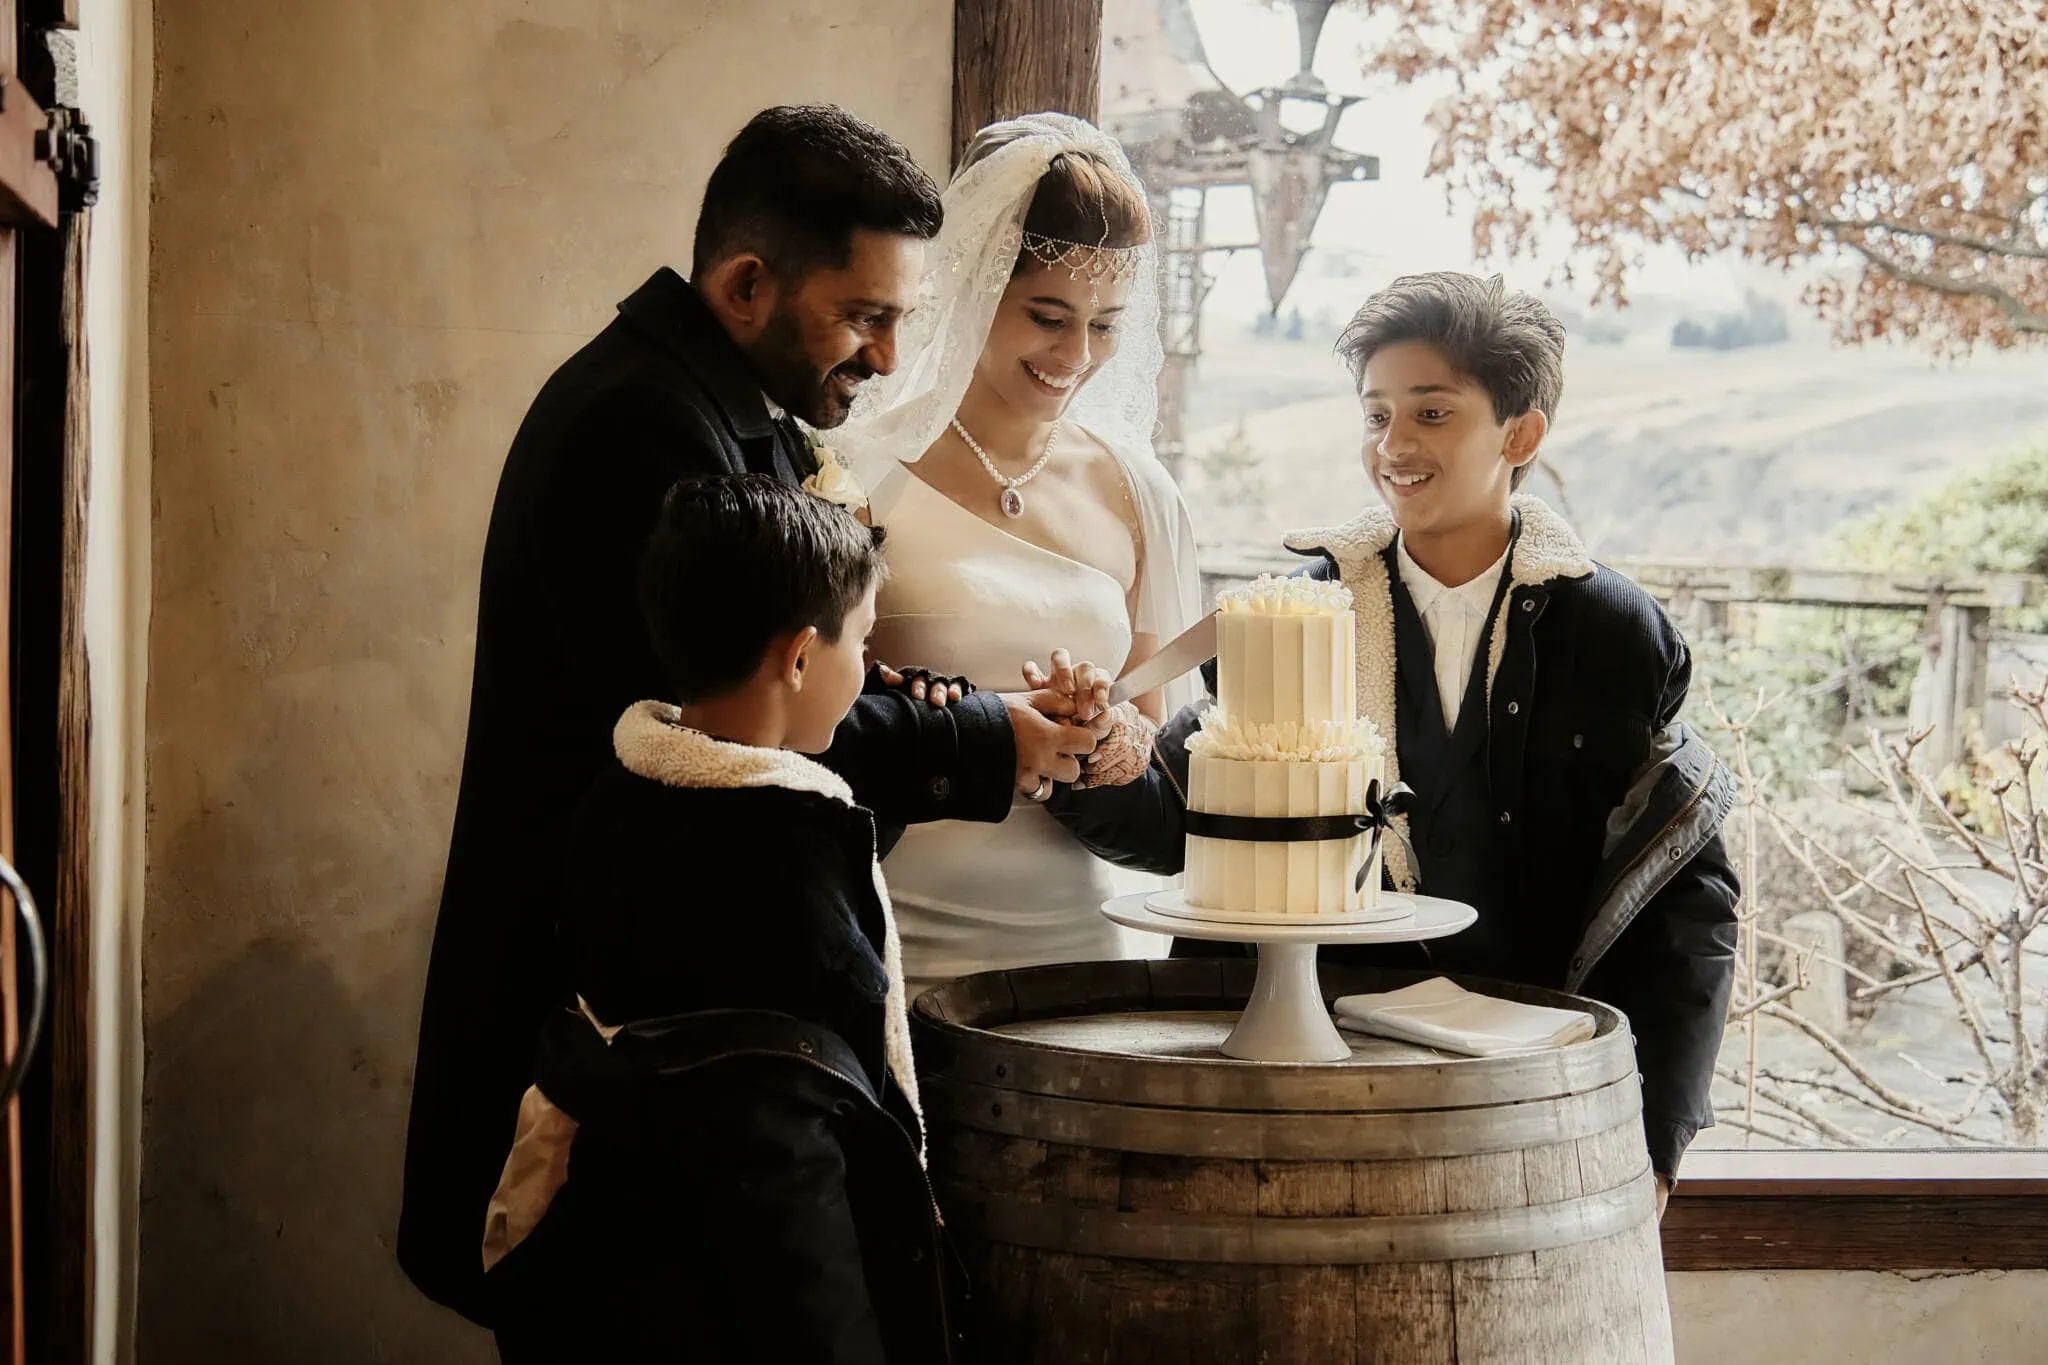 Queenstown New Zealand Elopement Wedding Photographer - Wasim and Yumn cutting a cake in front of a barrel at their Queenstown Islamic Wedding.